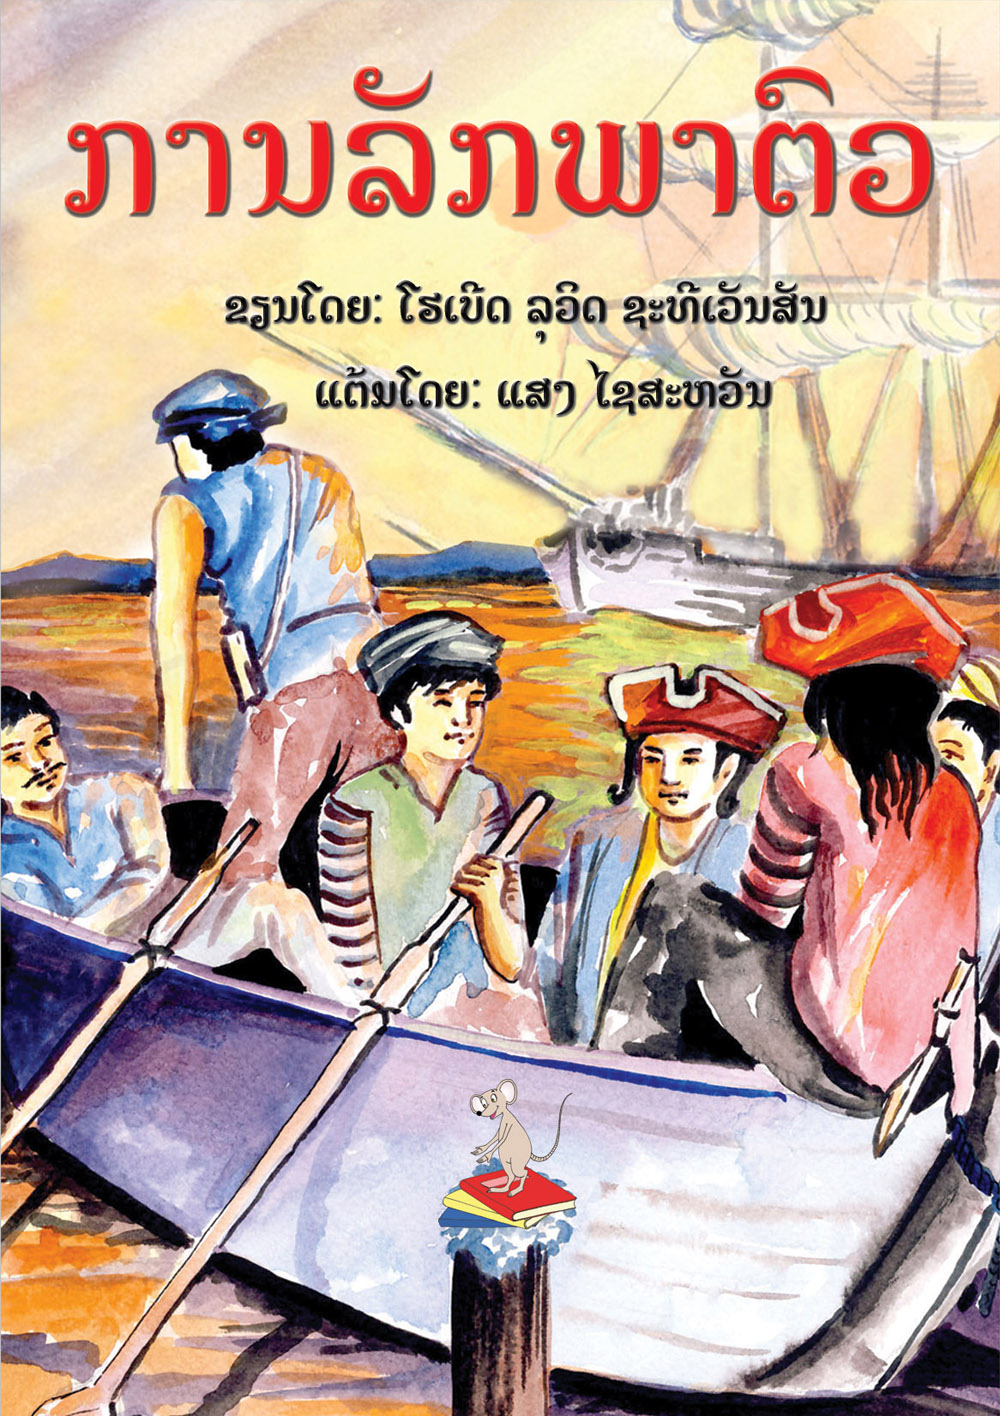 Kidnapped large book cover, published in Lao language